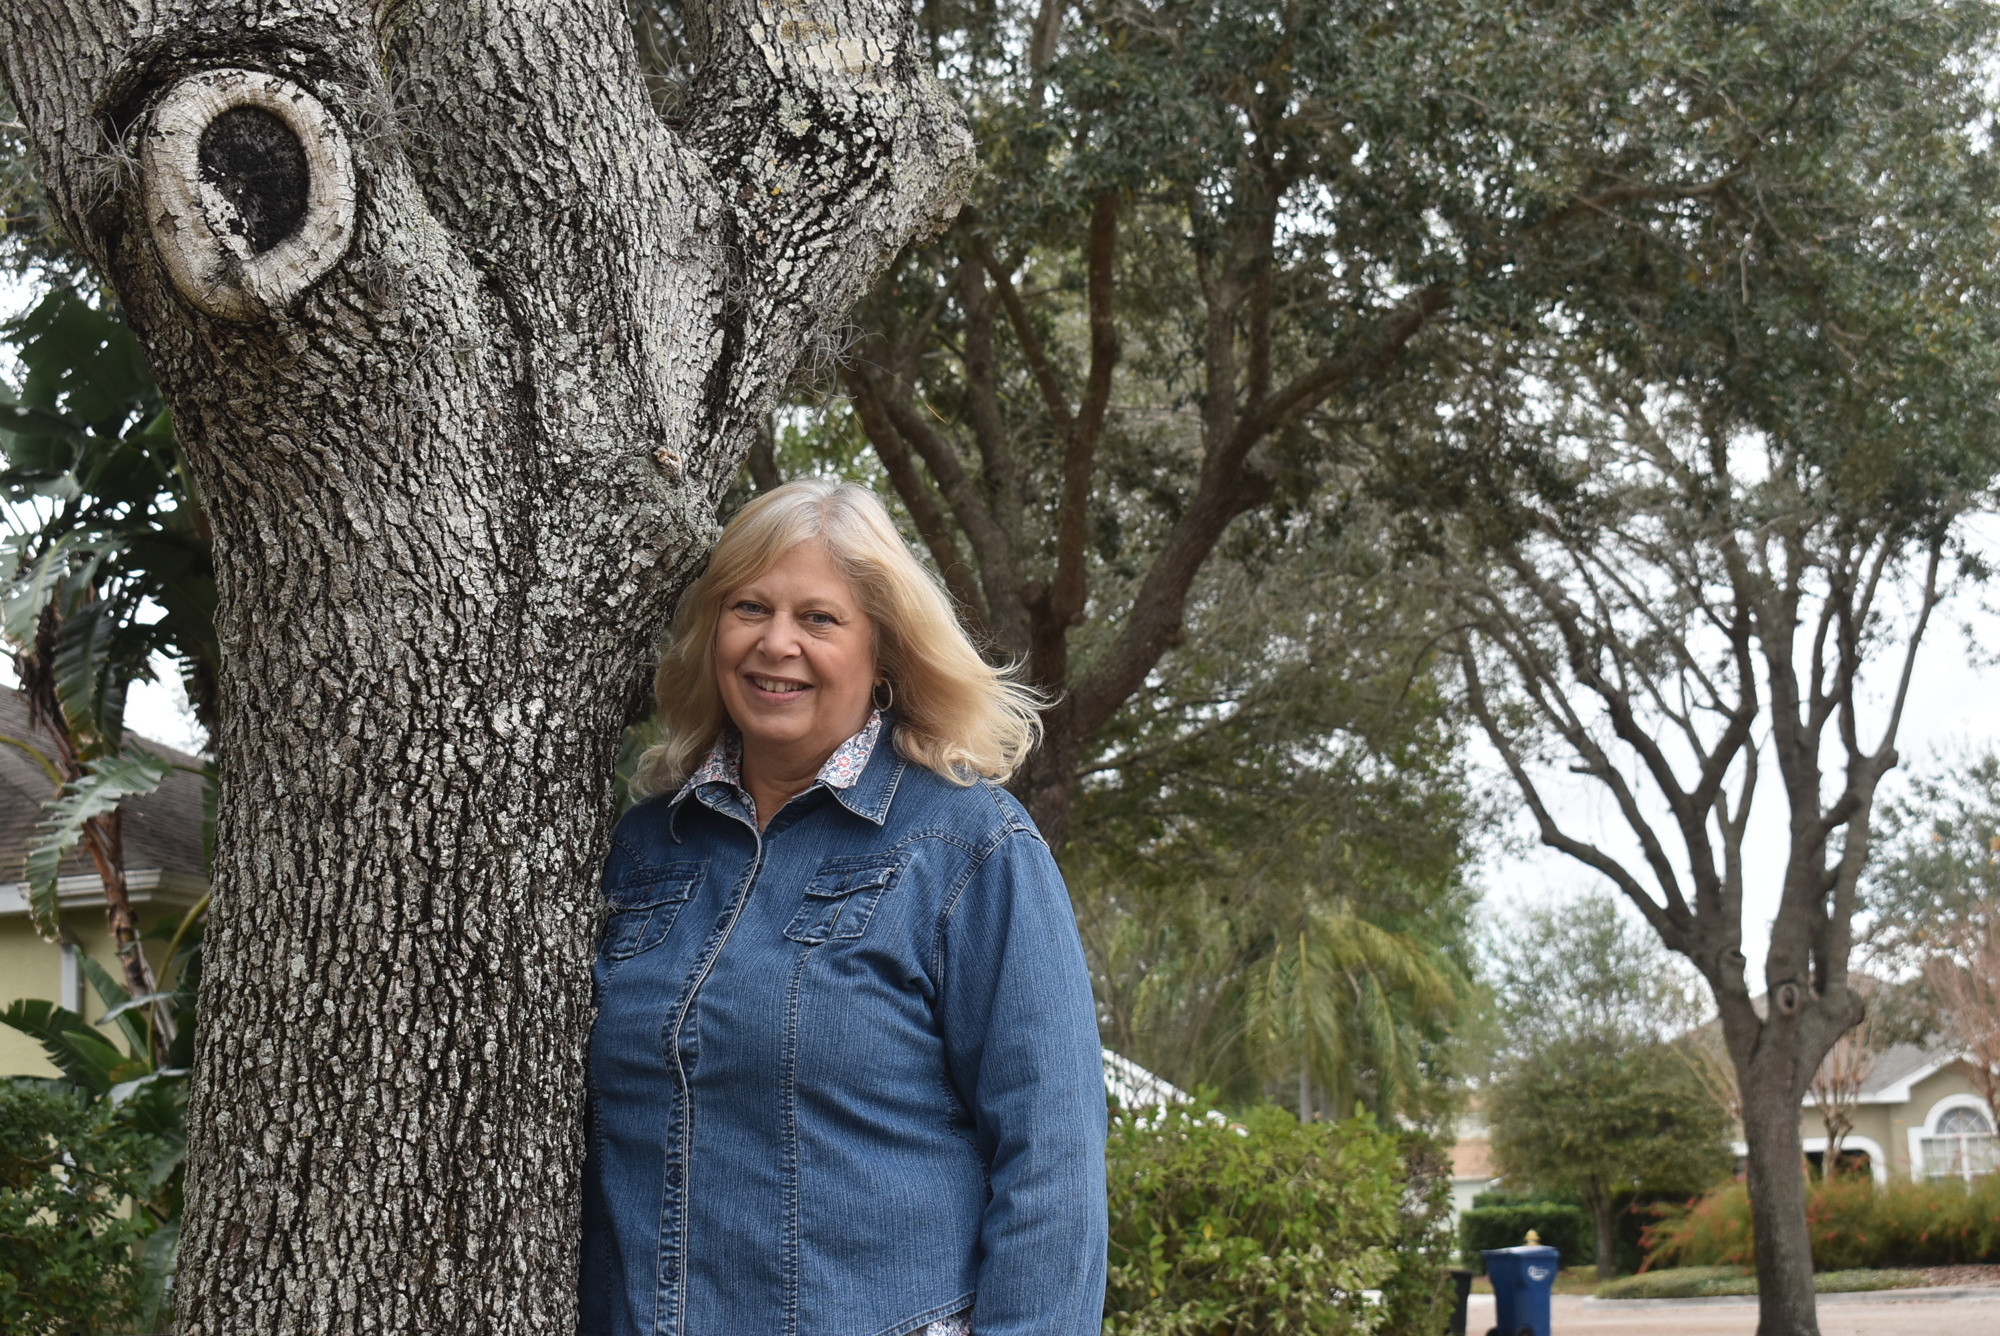 Summerfield resident Cathy Masztalics is concerned about the environmental impact of removing 177 trees, including loss of habitat for birds and squirrels.